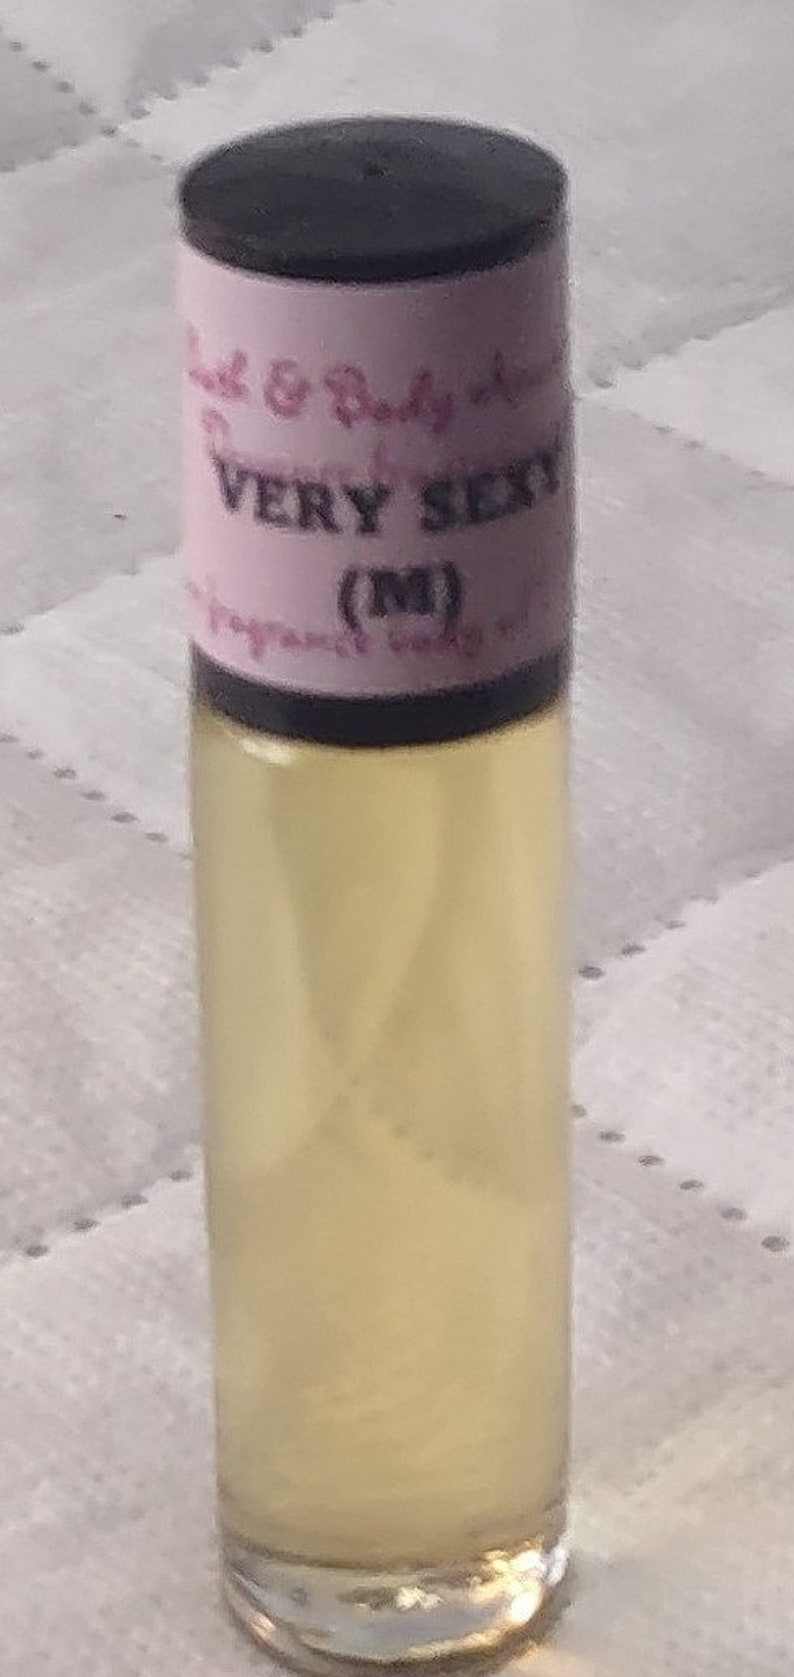 Fragrance Roll-On Body Oils 1/3oz bottle. Our impression of all our fragrances. Very Sexy (M)